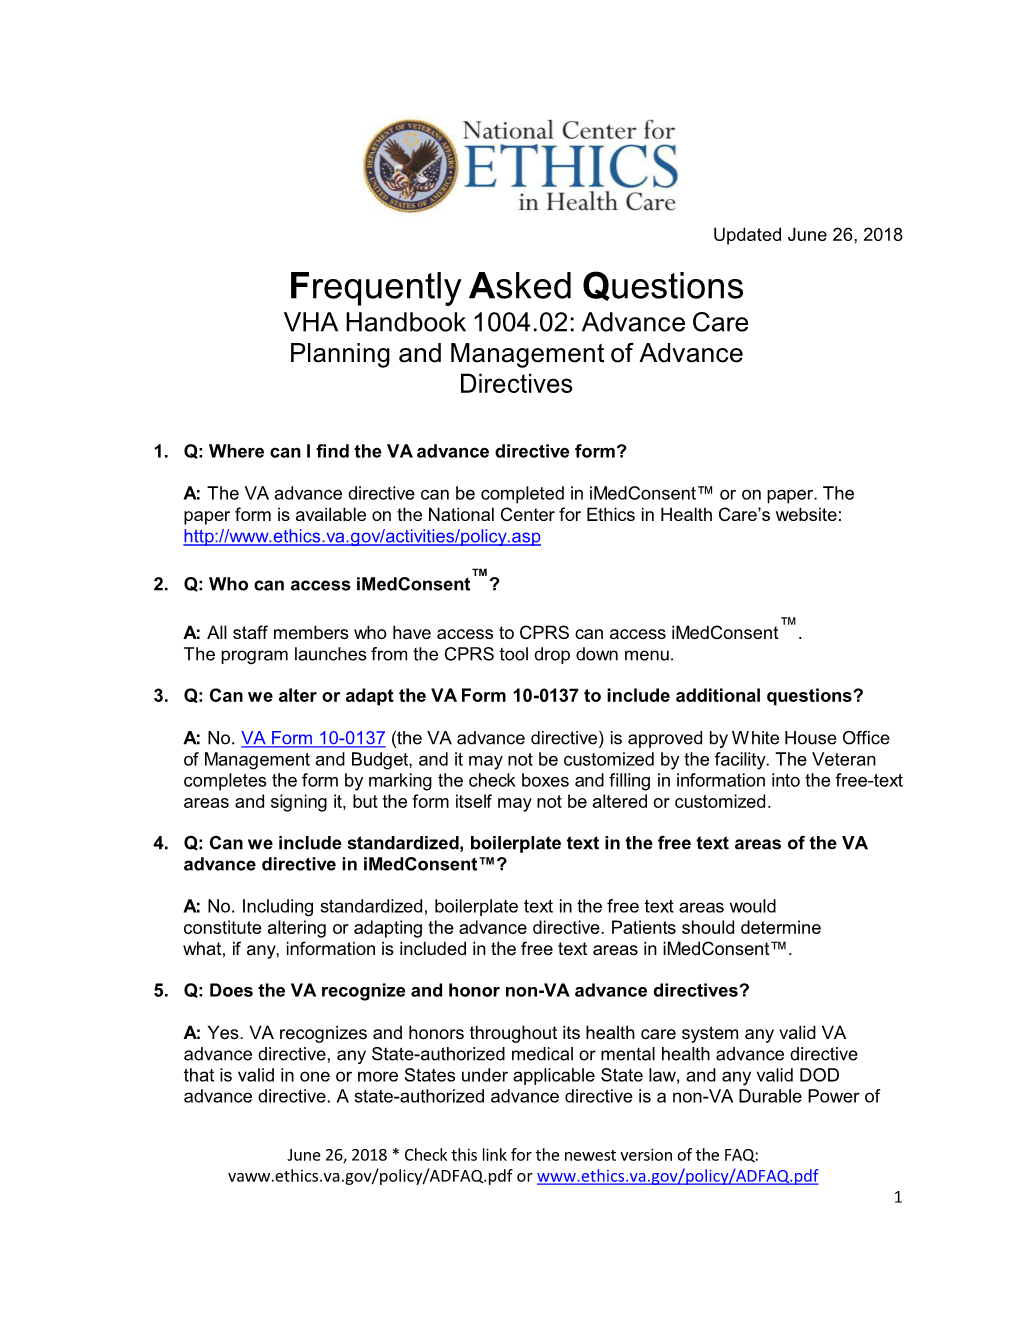 Frequently Asked Questions VHA Handbook 1004.02: Advance Care Planning and Management of Advance Directives